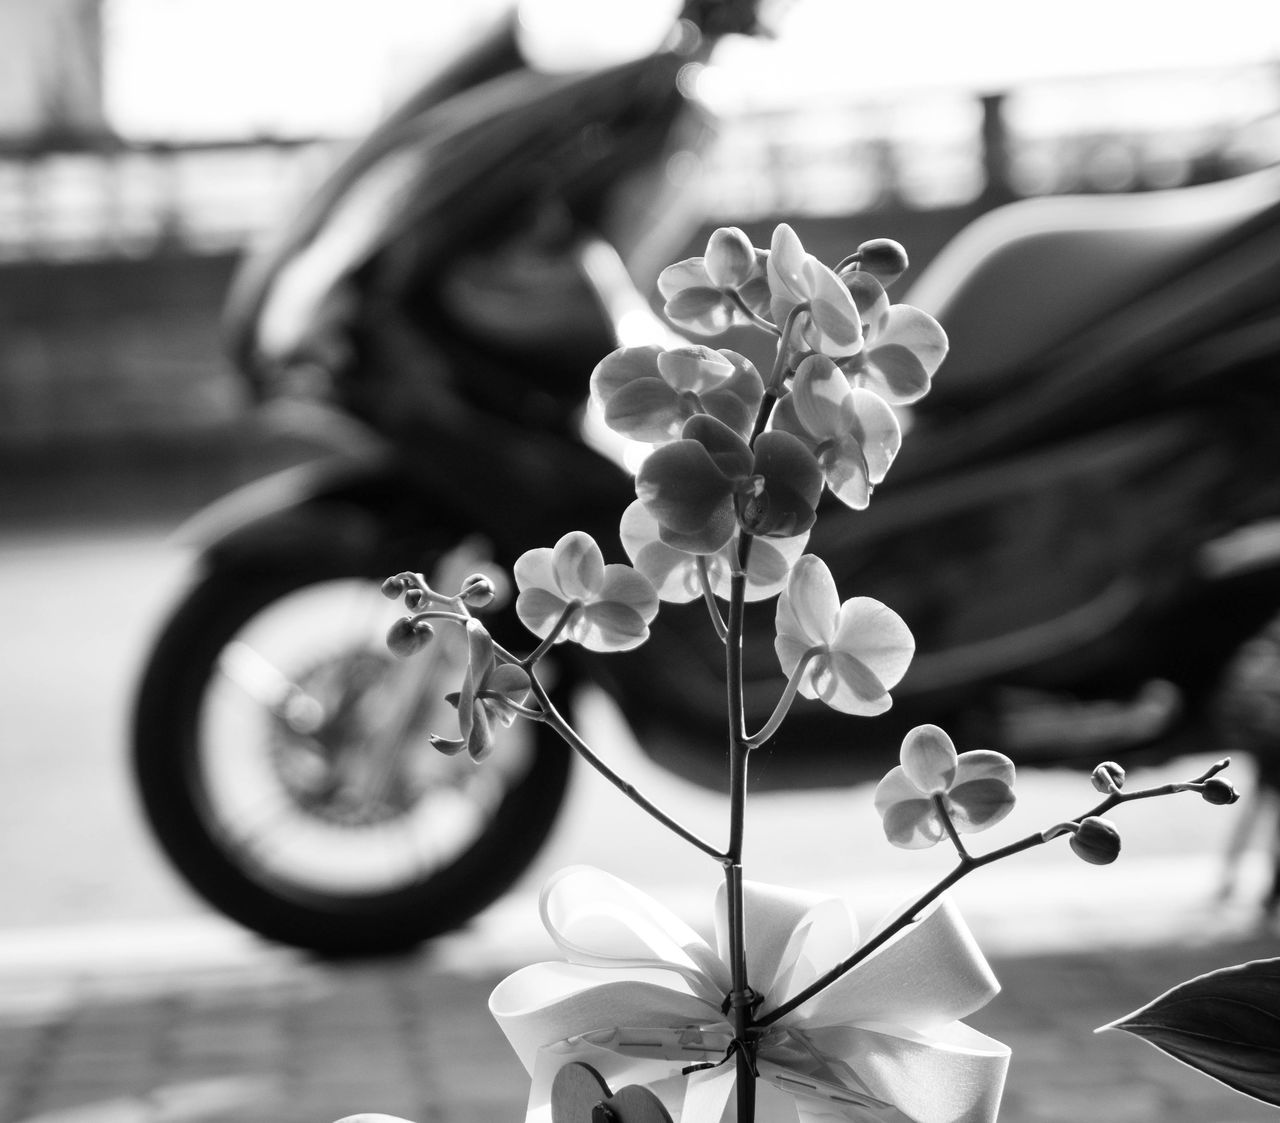 flower, focus on foreground, freshness, fragility, bicycle, transportation, petal, land vehicle, mode of transport, flower head, growth, plant, close-up, nature, beauty in nature, stem, blooming, day, blossom, outdoors